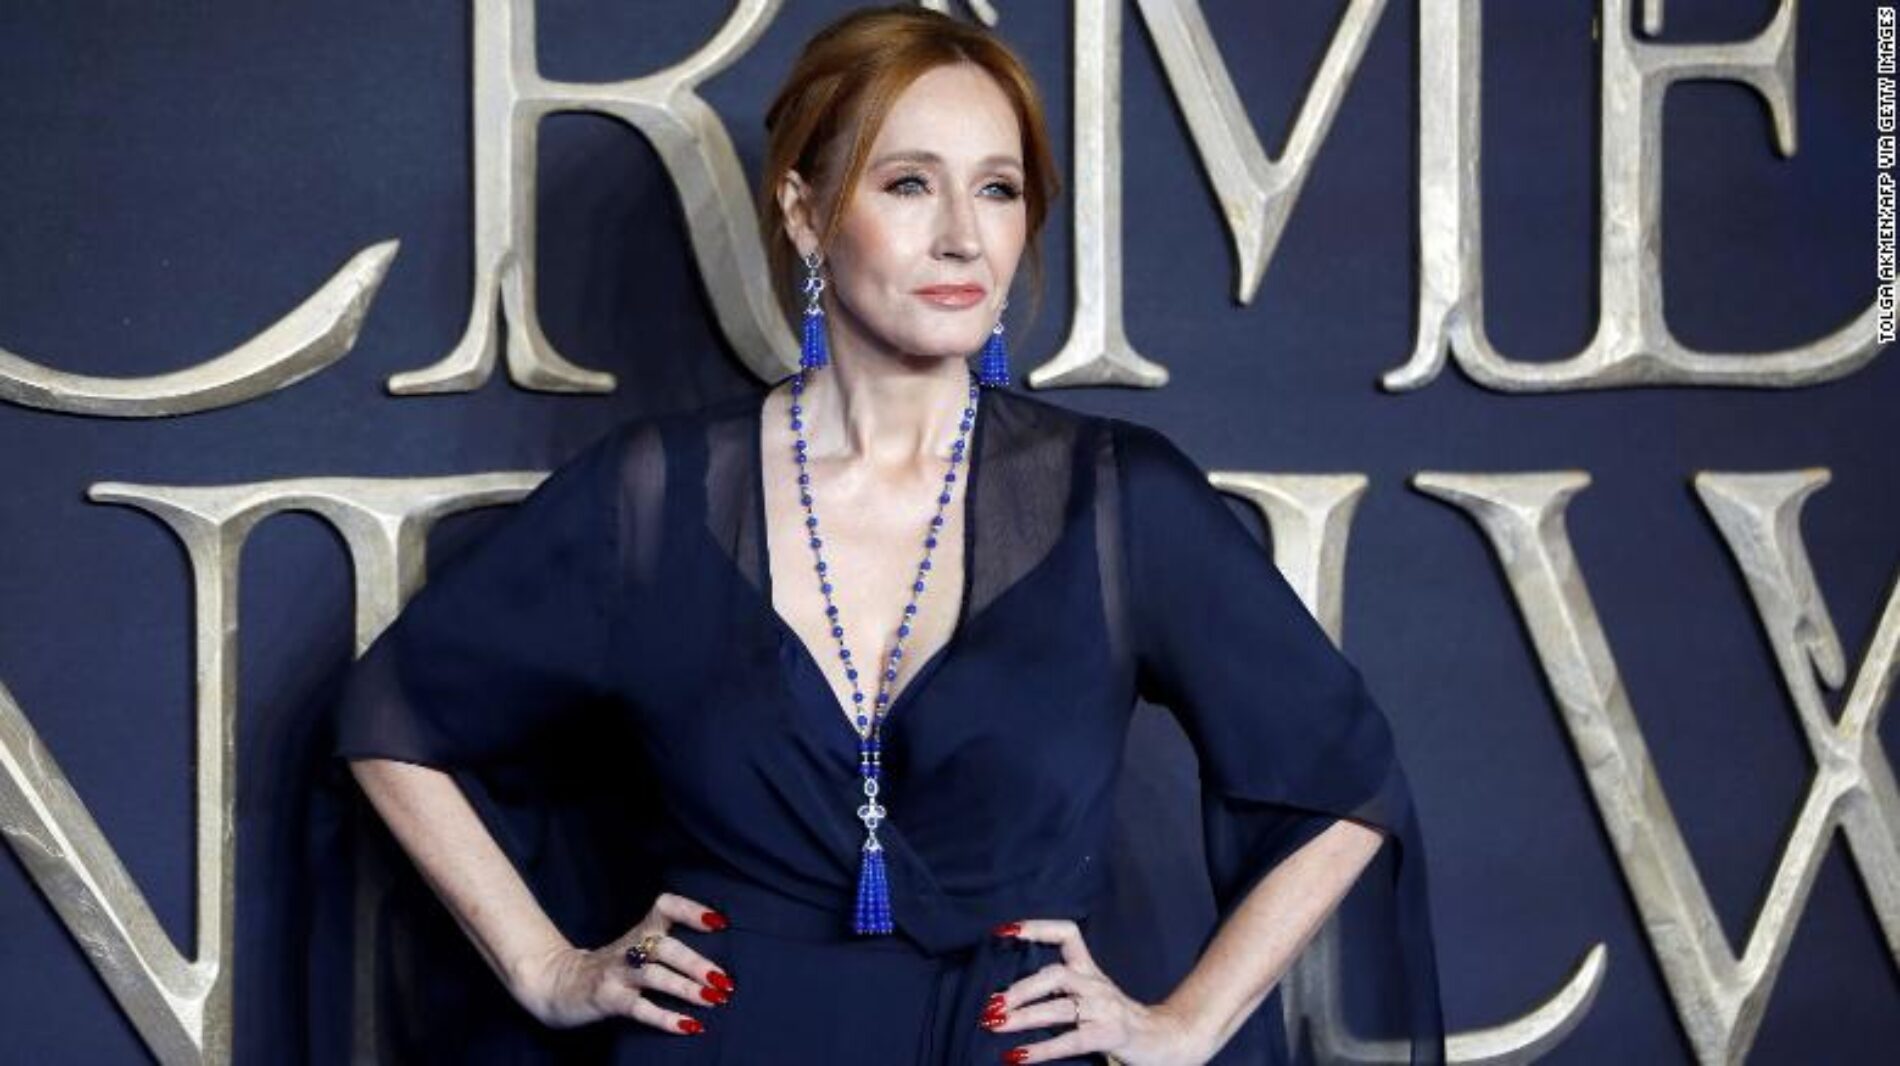 JK Rowling sparks another transgender rights row with her new book whose character is supposedly a cross-dressing serial killer